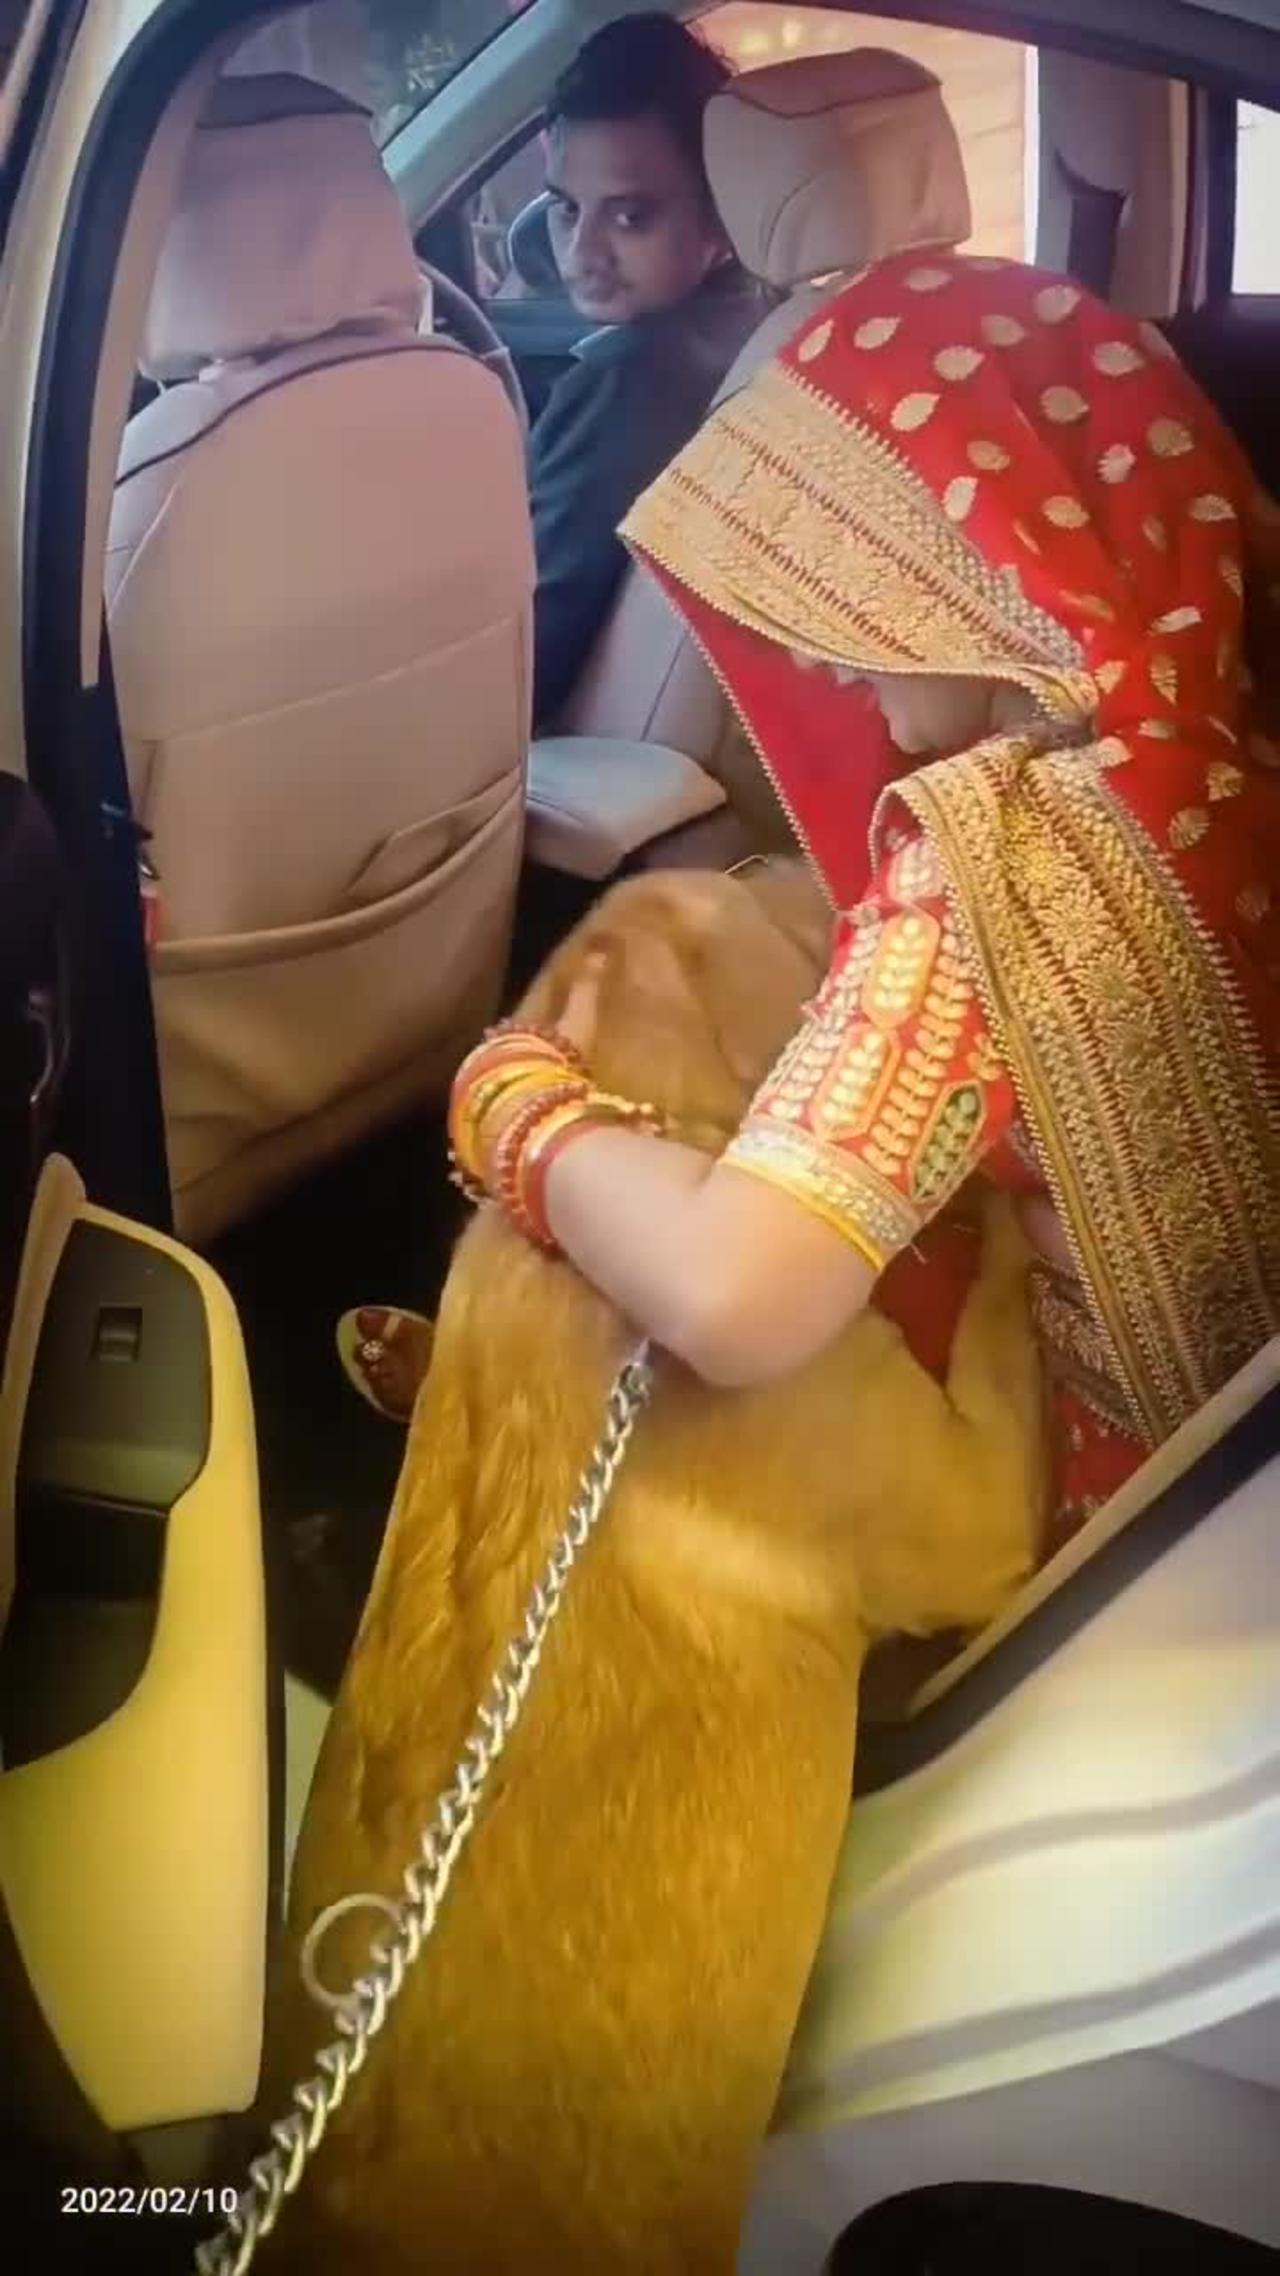 The dog was crying for girl weddings time video